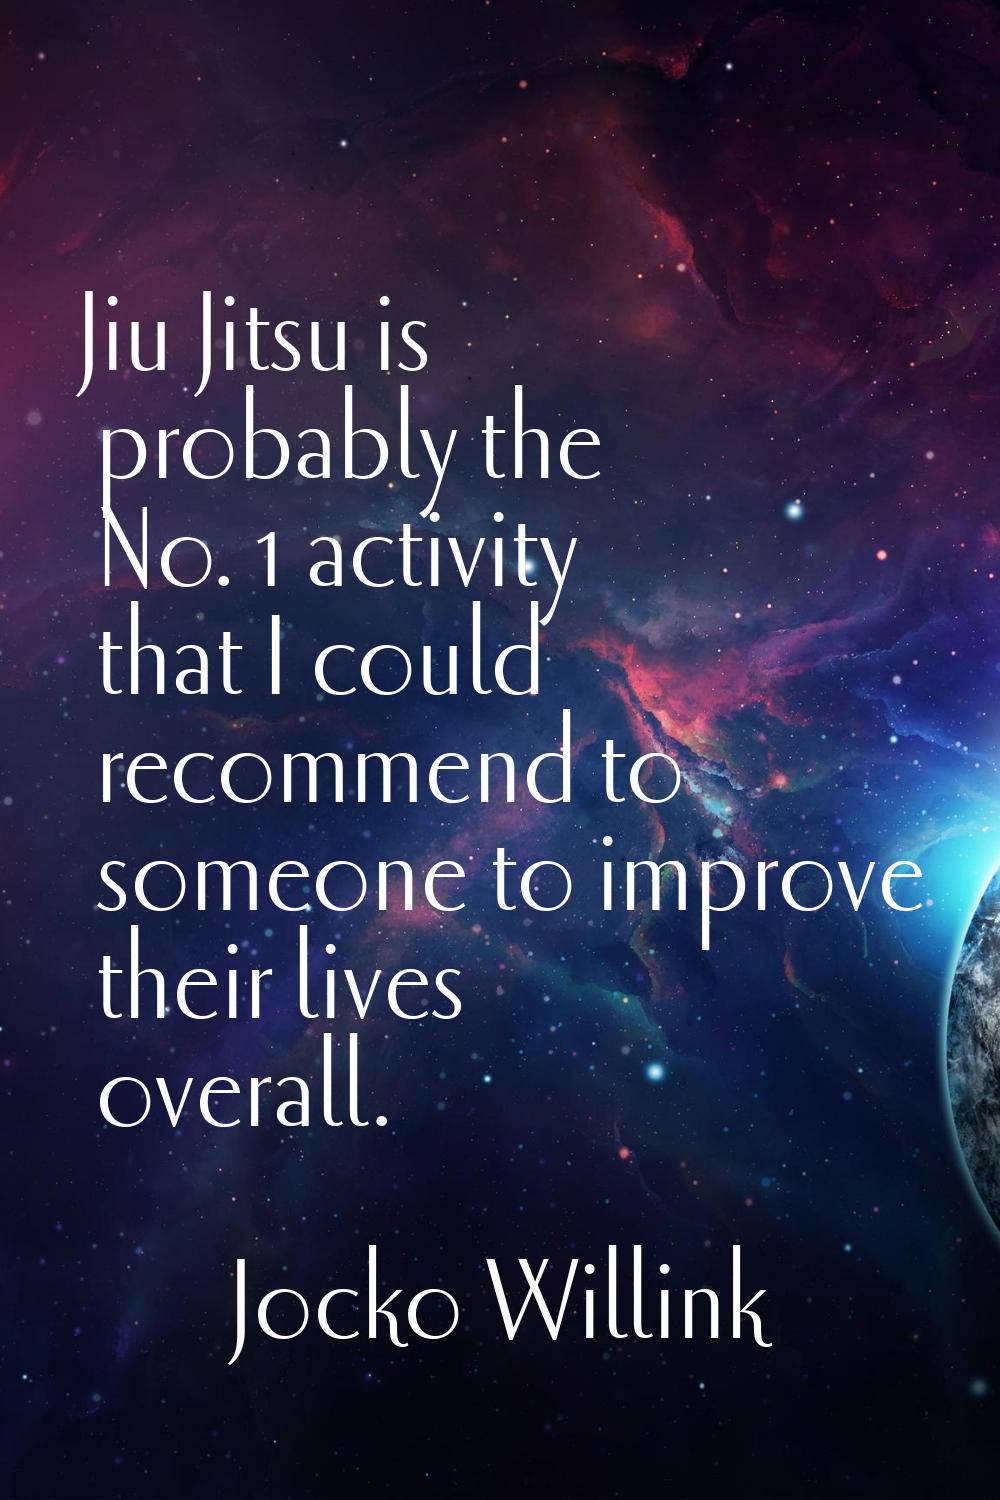 Jiu Jitsu is probably the No. 1 activity that I could recommend to someone to improve their lives o